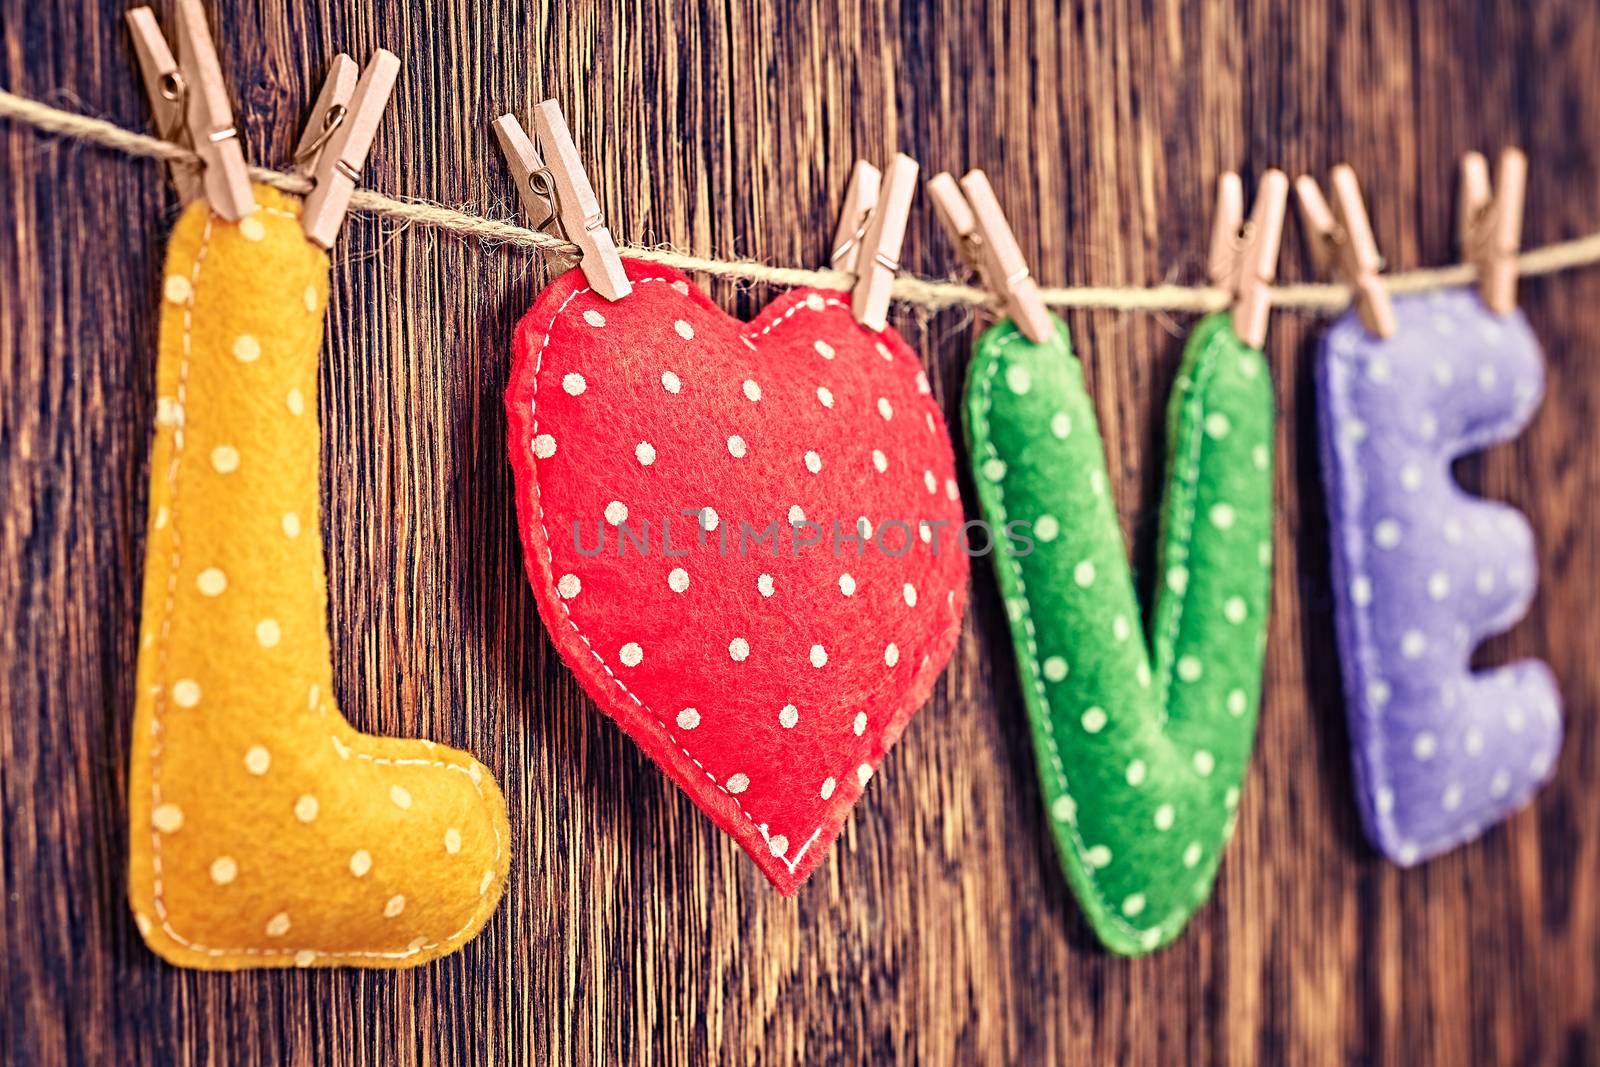 Word Love polka dots, Heart Handmade, hanging on rope. Valentines  Day. Retro vintage romantic style, wooden background, toned. Vivid unusual creative greeting card, multicolored felt